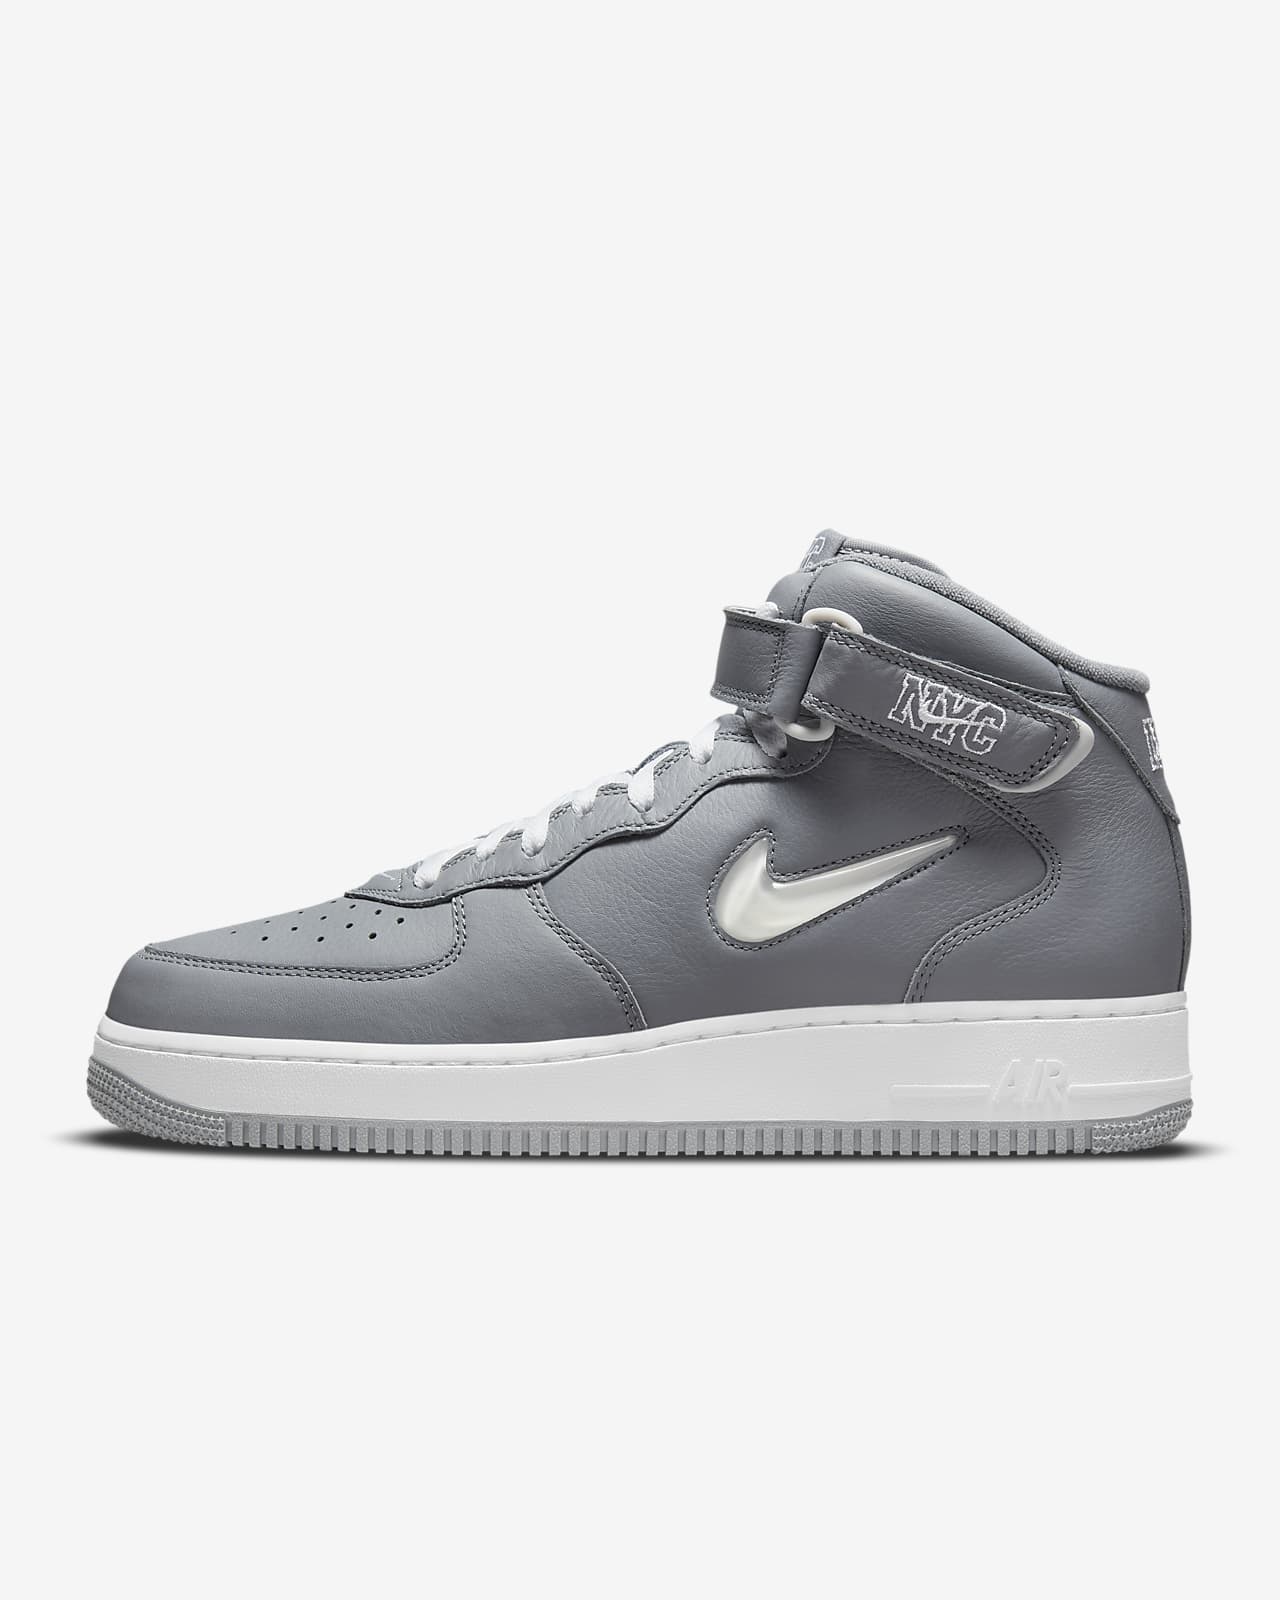 Nike Air Force 1 Mid Men's Shoes. Nike SG